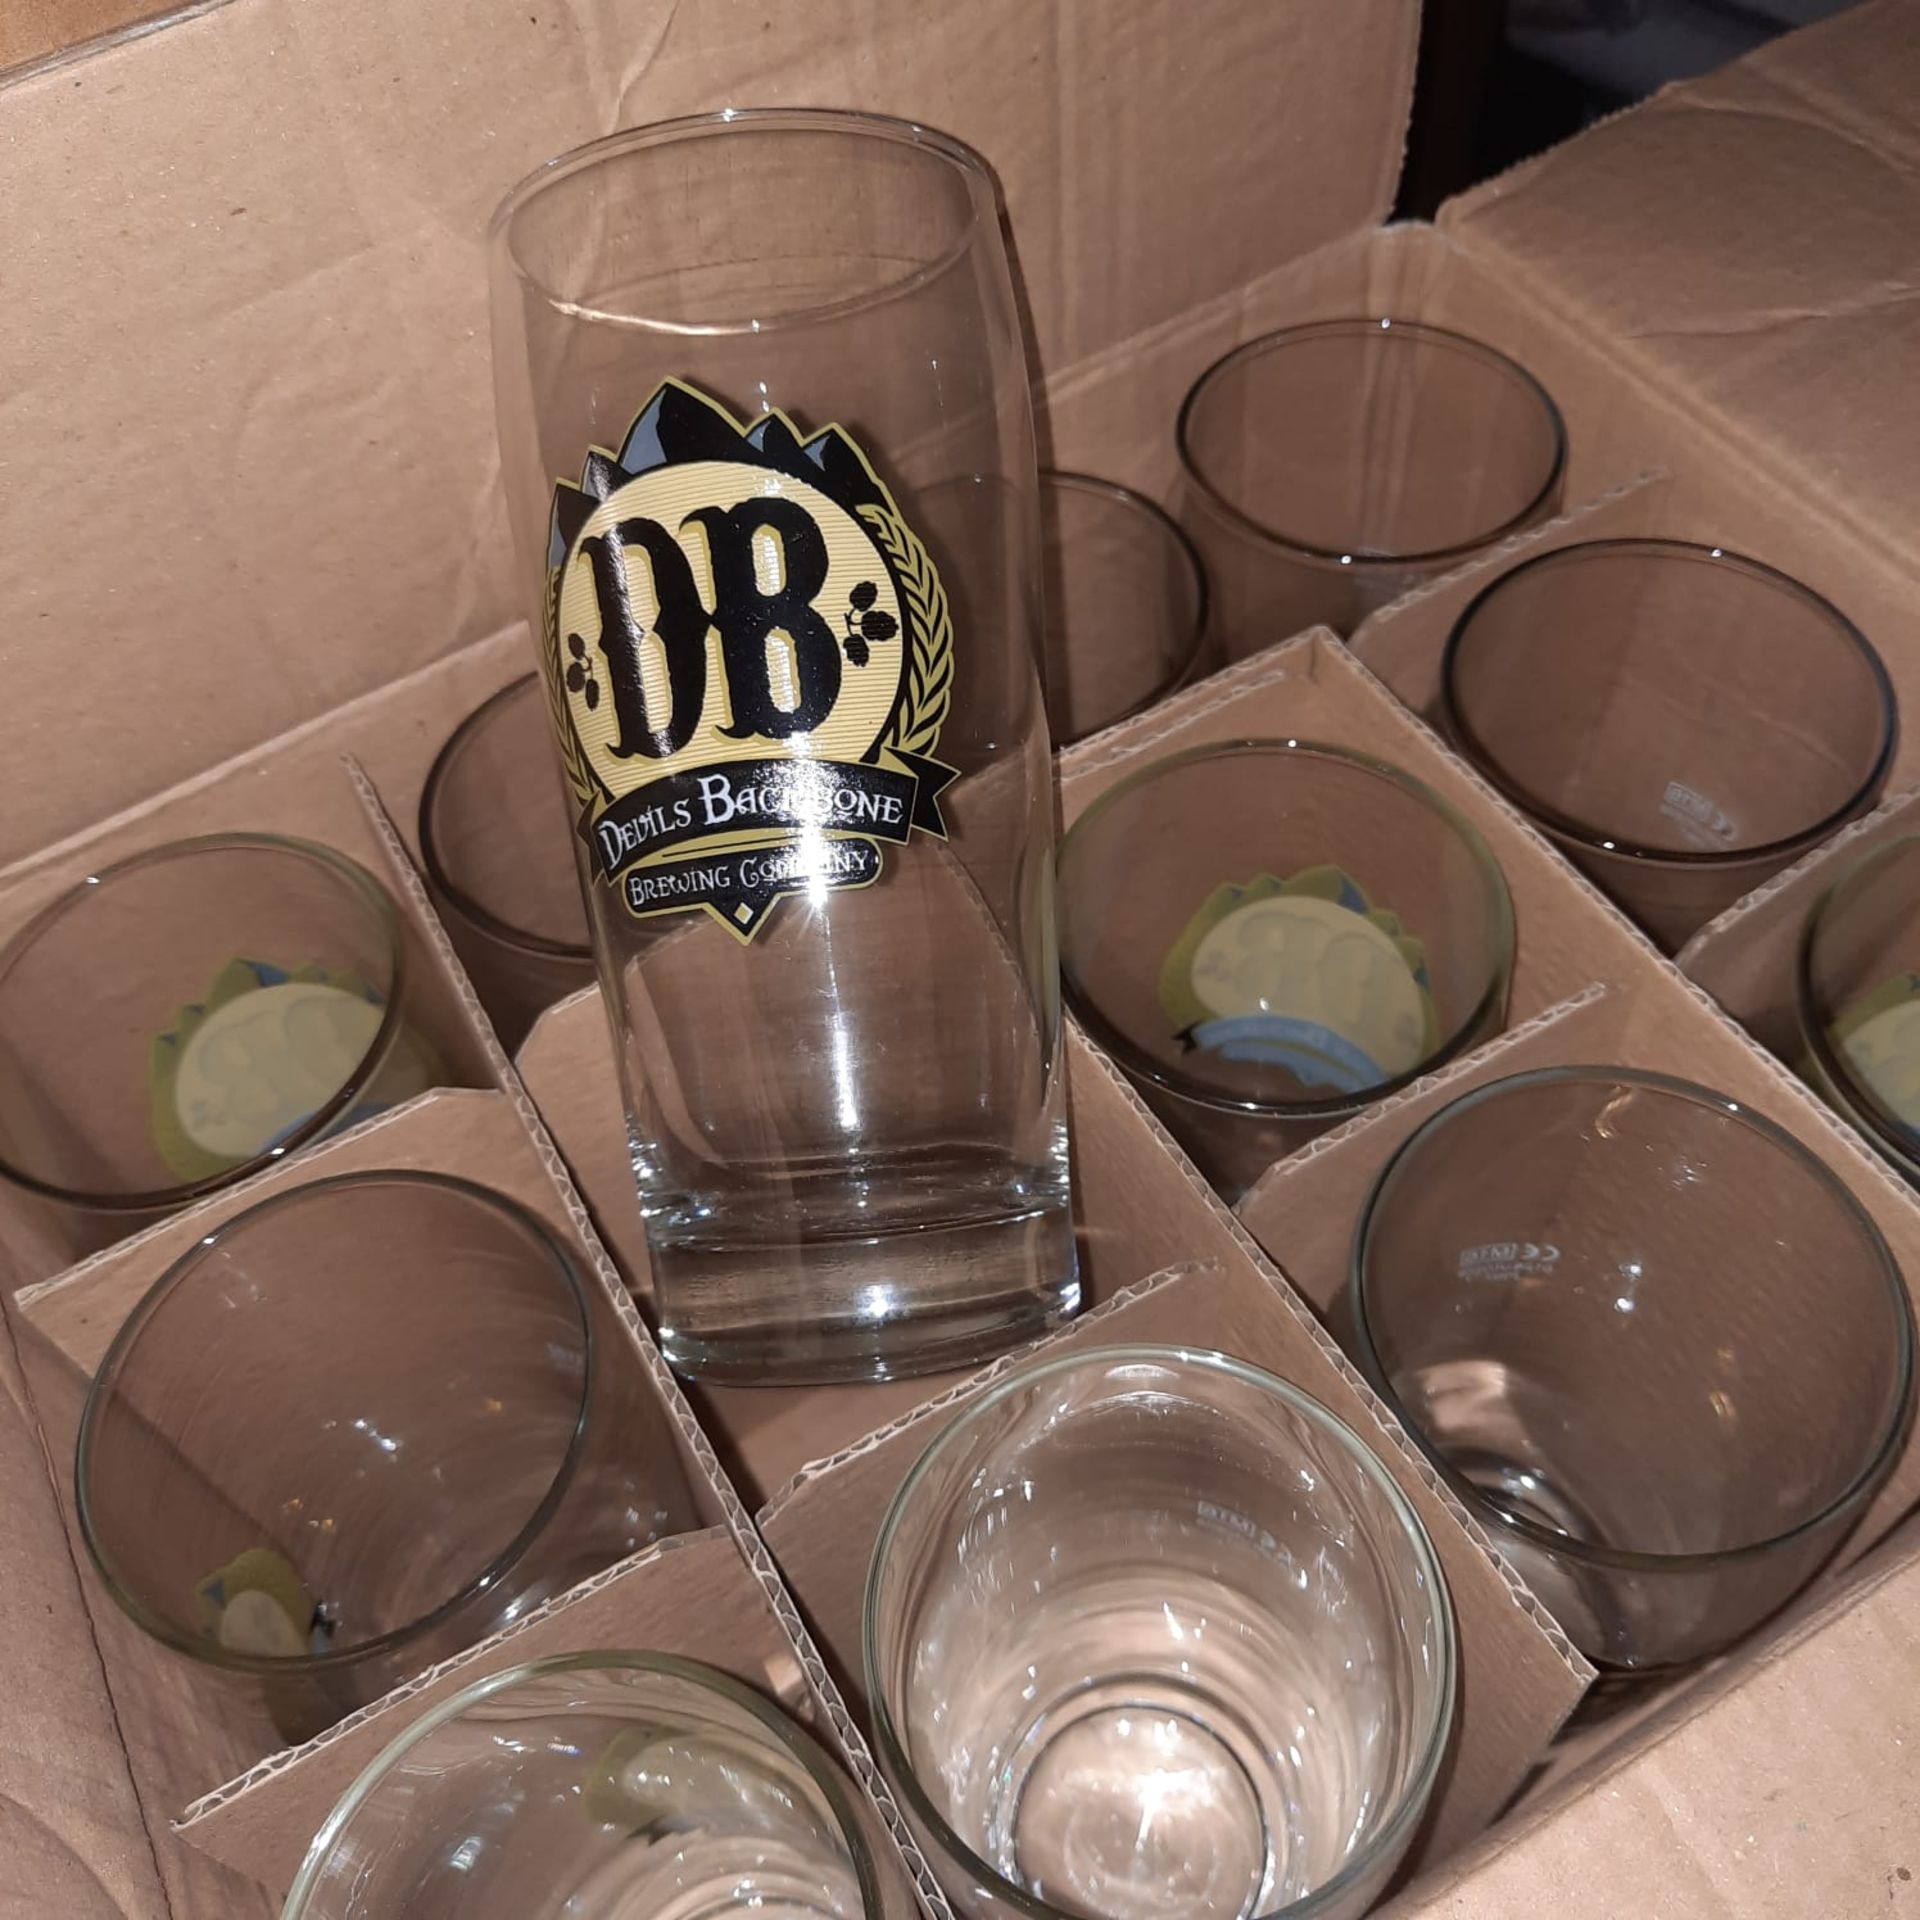 X 48 NEW & BOXED JUBLLE DEVILS BACKBONE BEER PINT GLASSES - SALEROOM AT THE BOTTOM OF ROW (E).